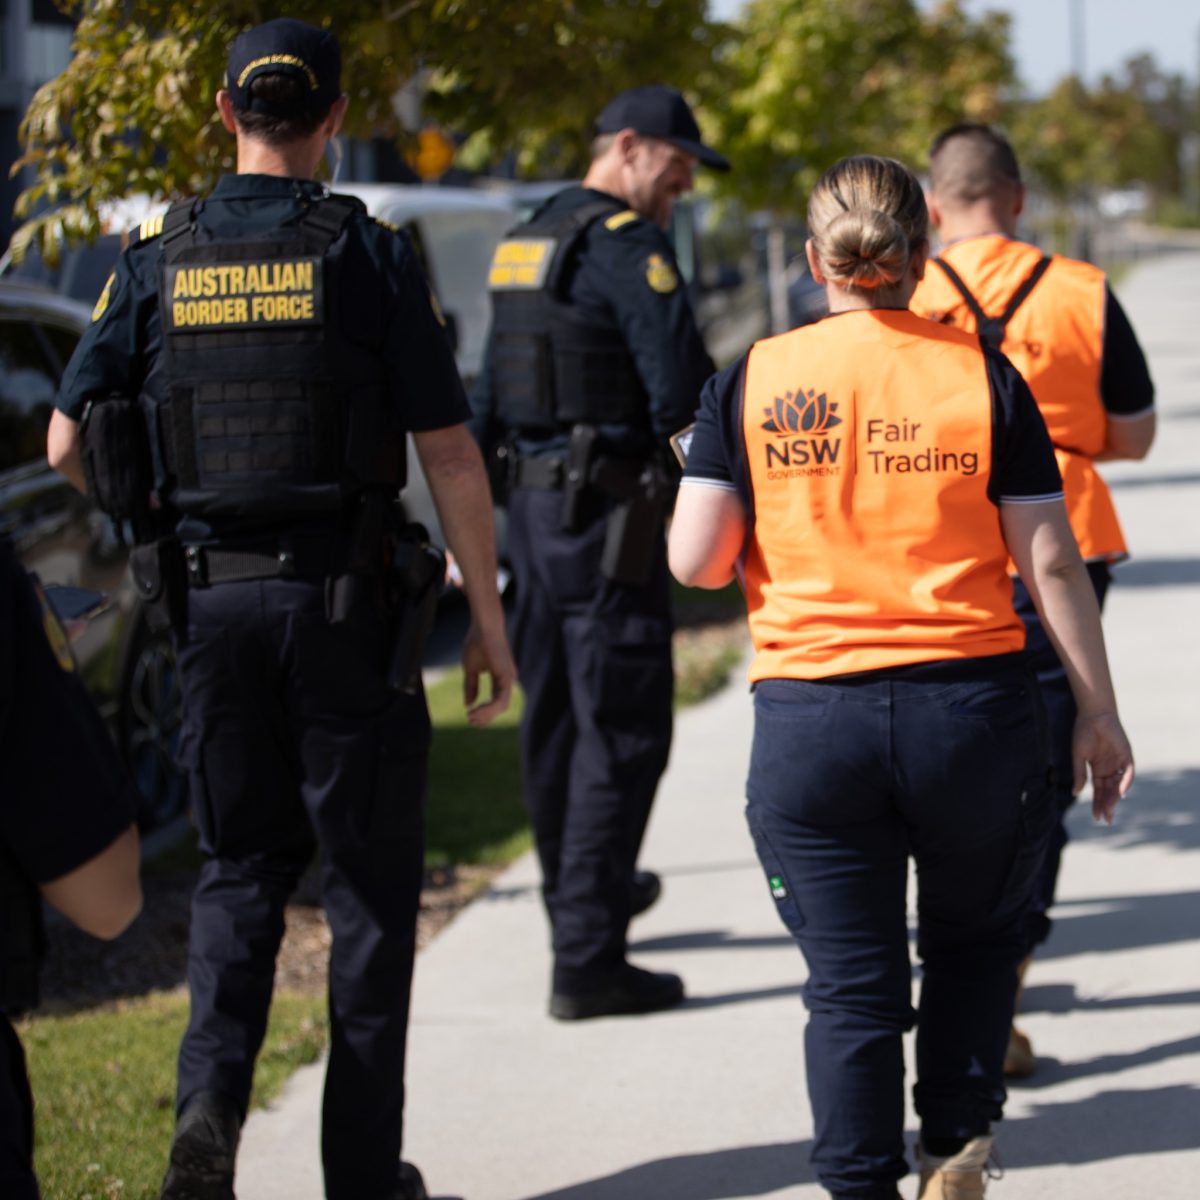 Fair Trading officers walking with Australian Border Force officers on a sidewalk.